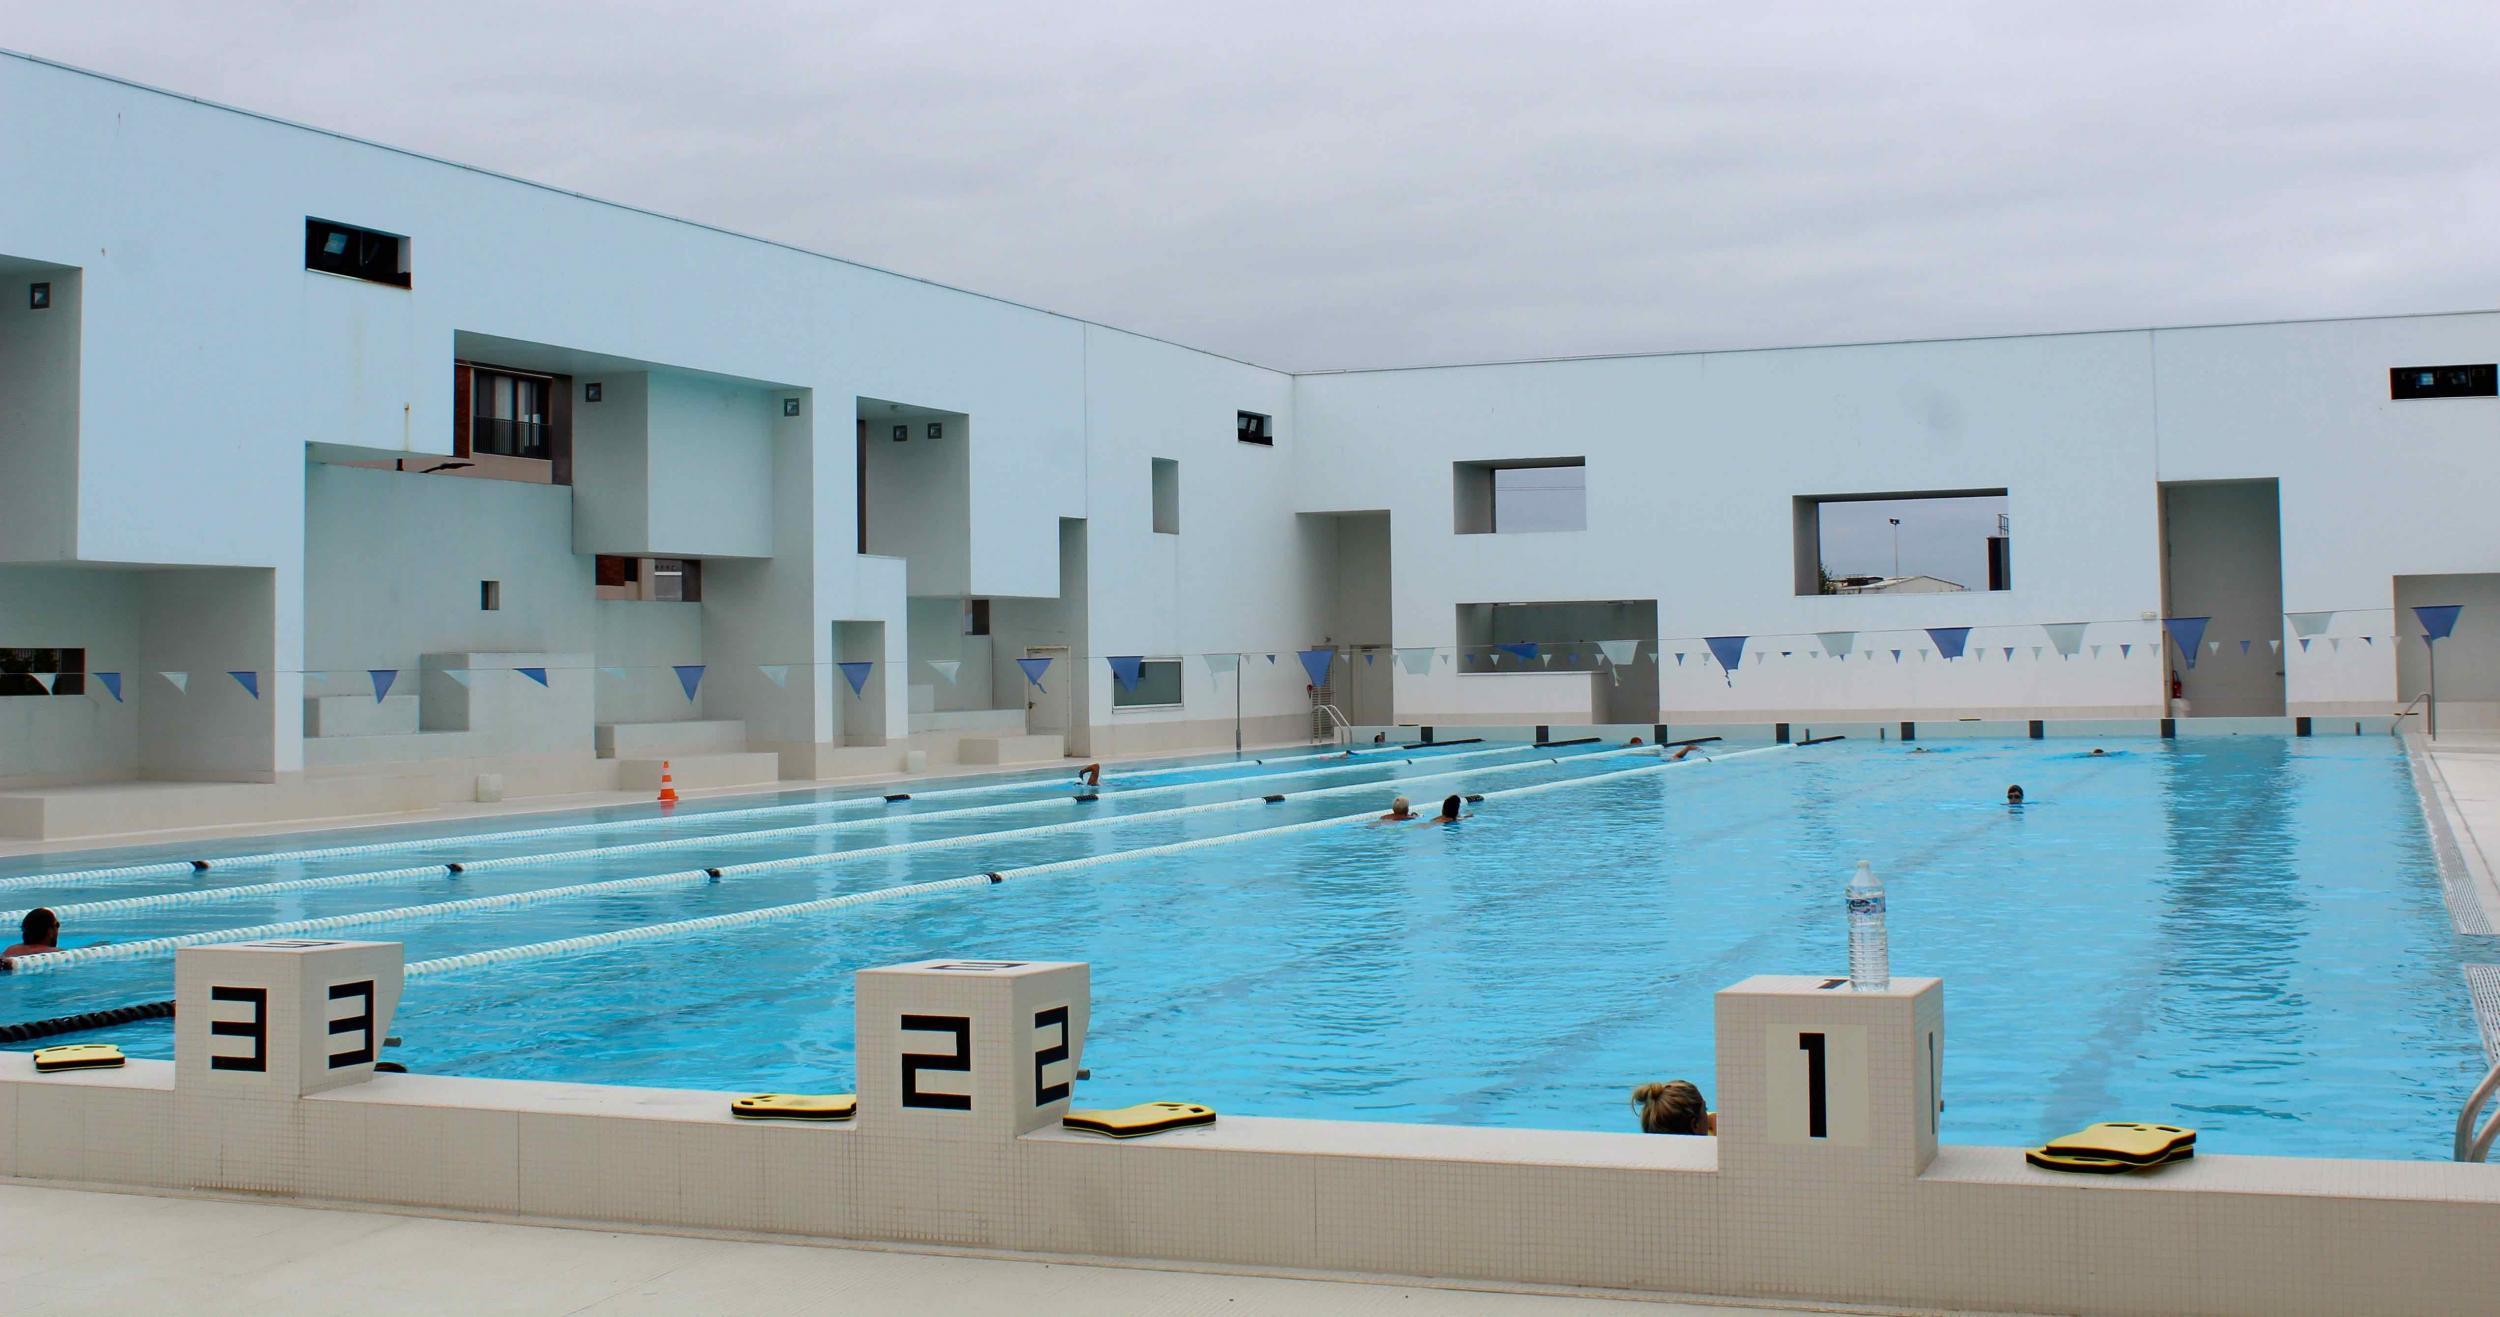 Les Bains des Docks is the town's modernist swimming complex